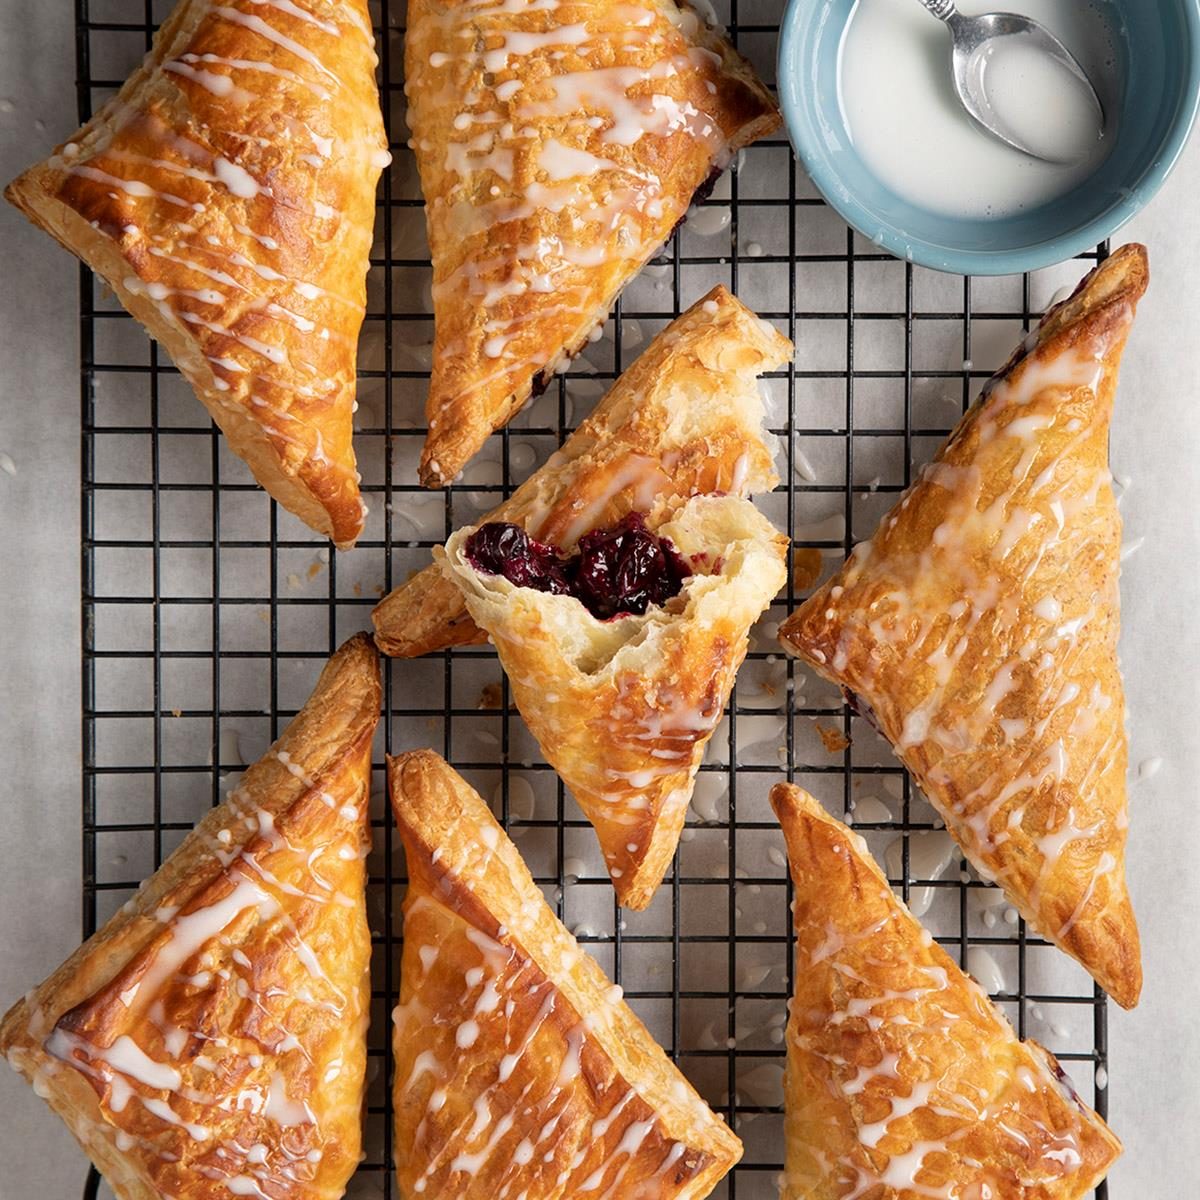 Blueberry Turnovers Exps Ft22 30145 St 07 19 1